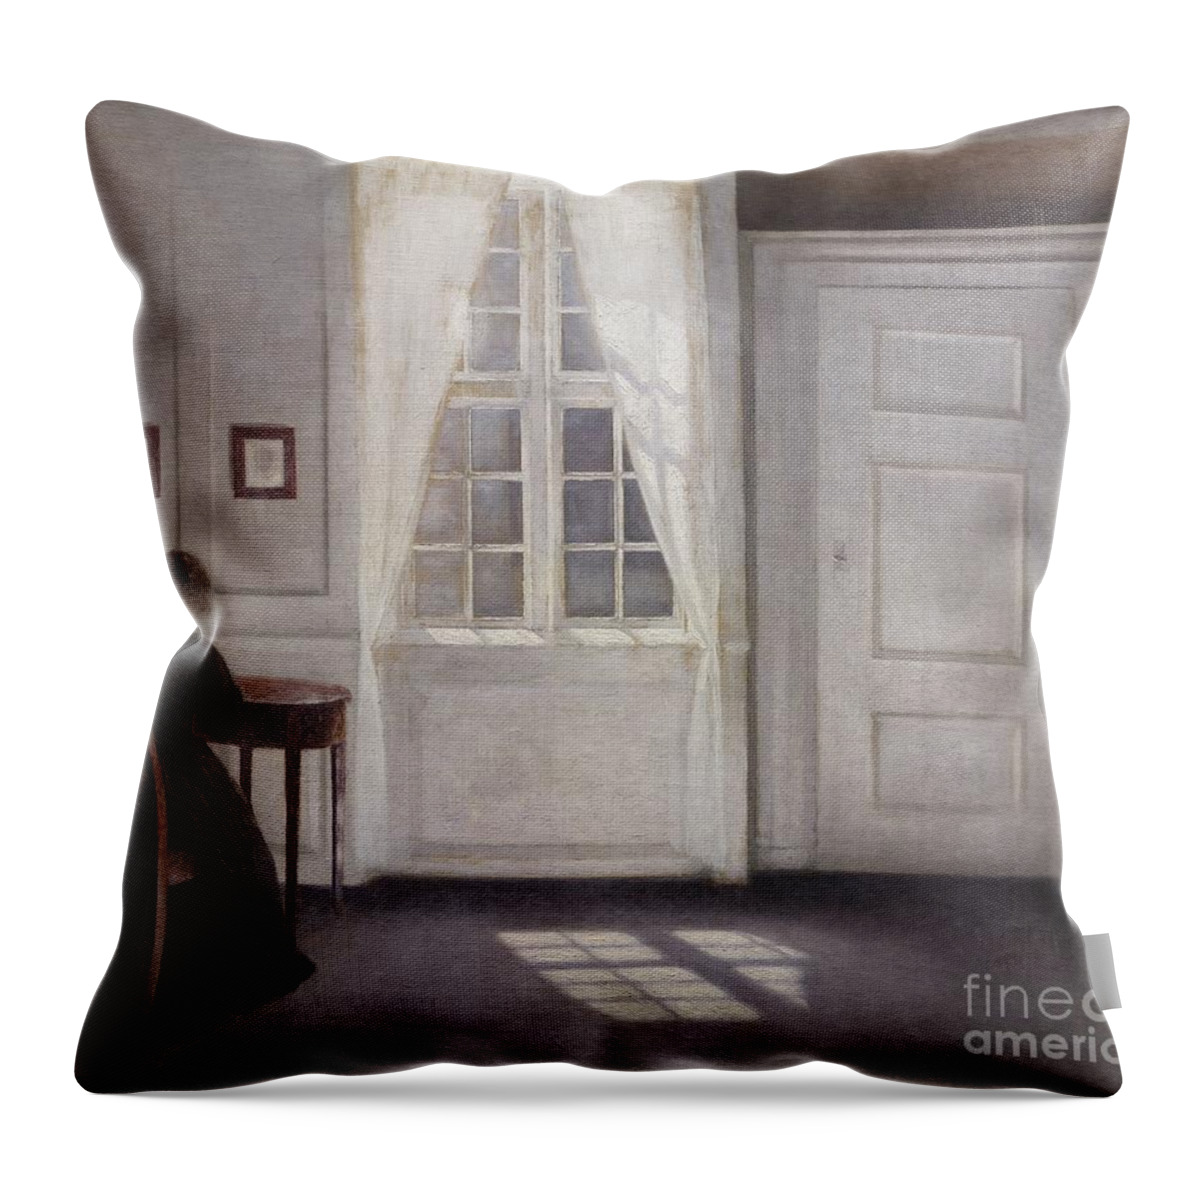 Copenhagen Throw Pillow featuring the painting Living In Strand Street With Sunshine On The Floor, 1901 by Vilhelm Hammershoi